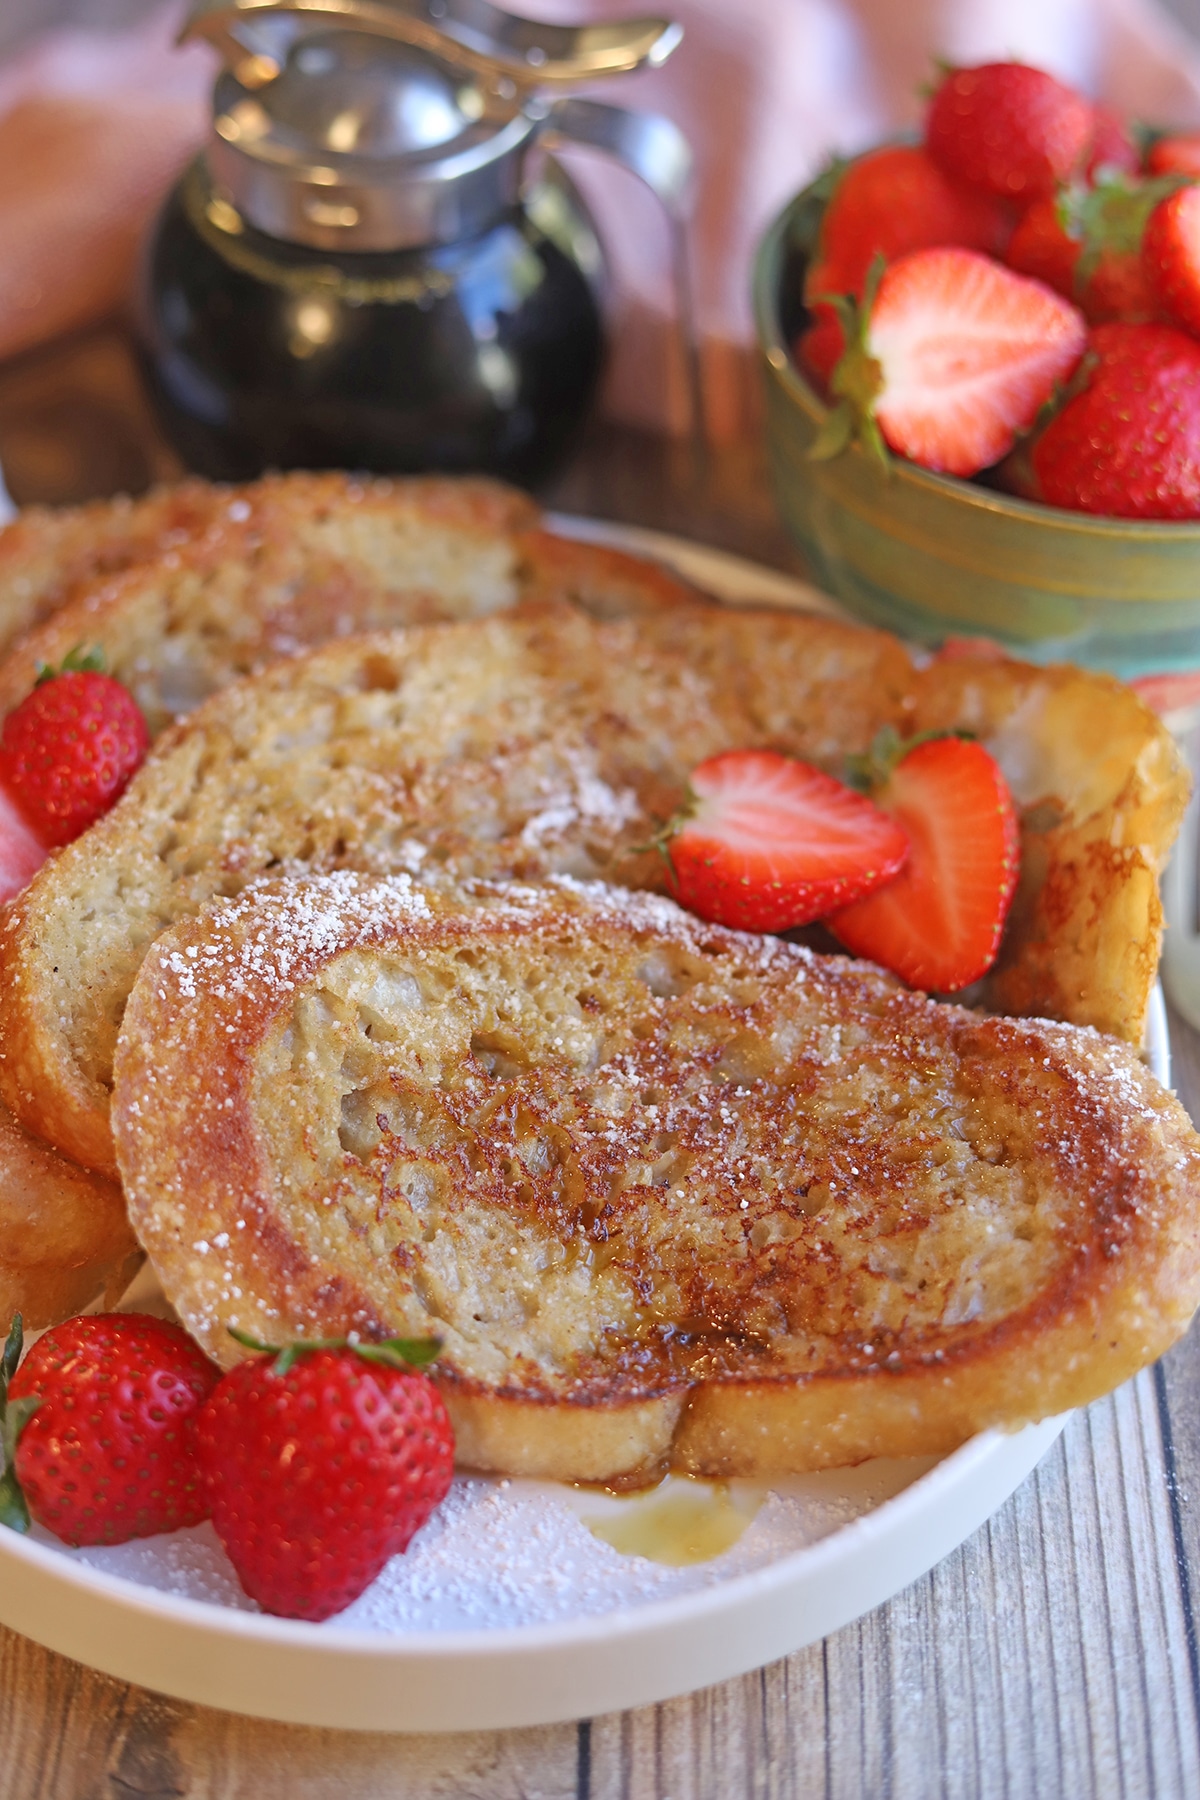 Platter of French toast with strawberries on table.